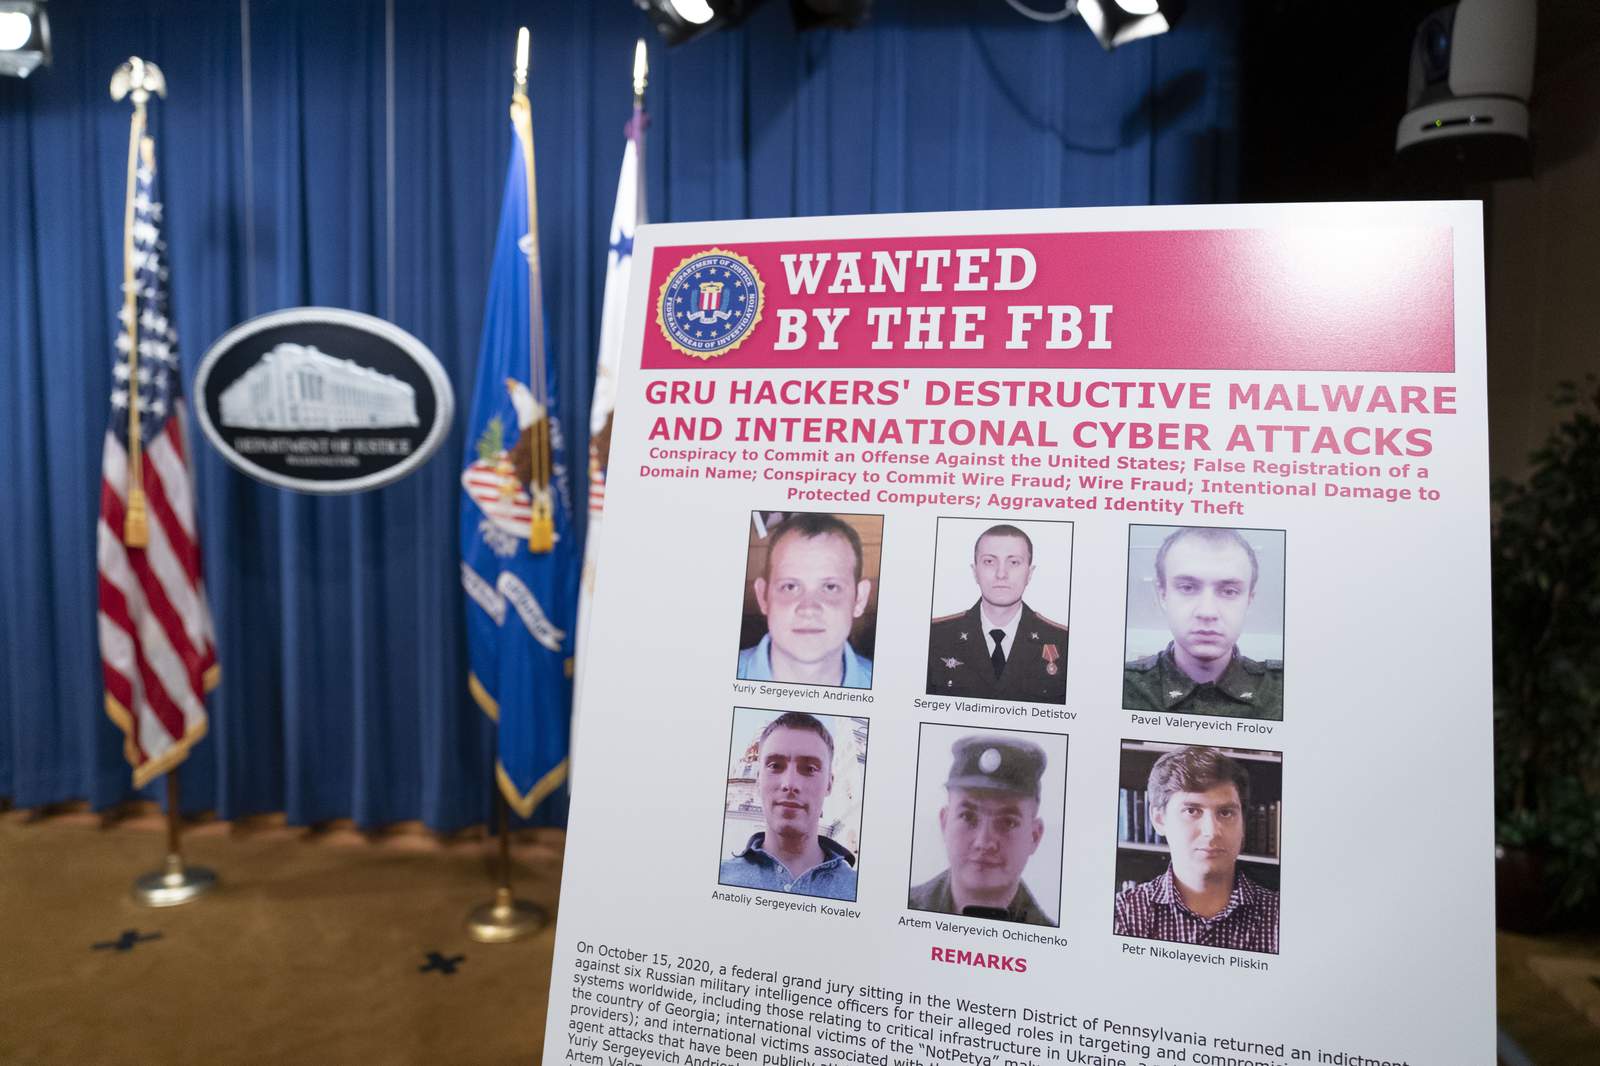 6 Russian officers charged in 'destructive' hacking campaign